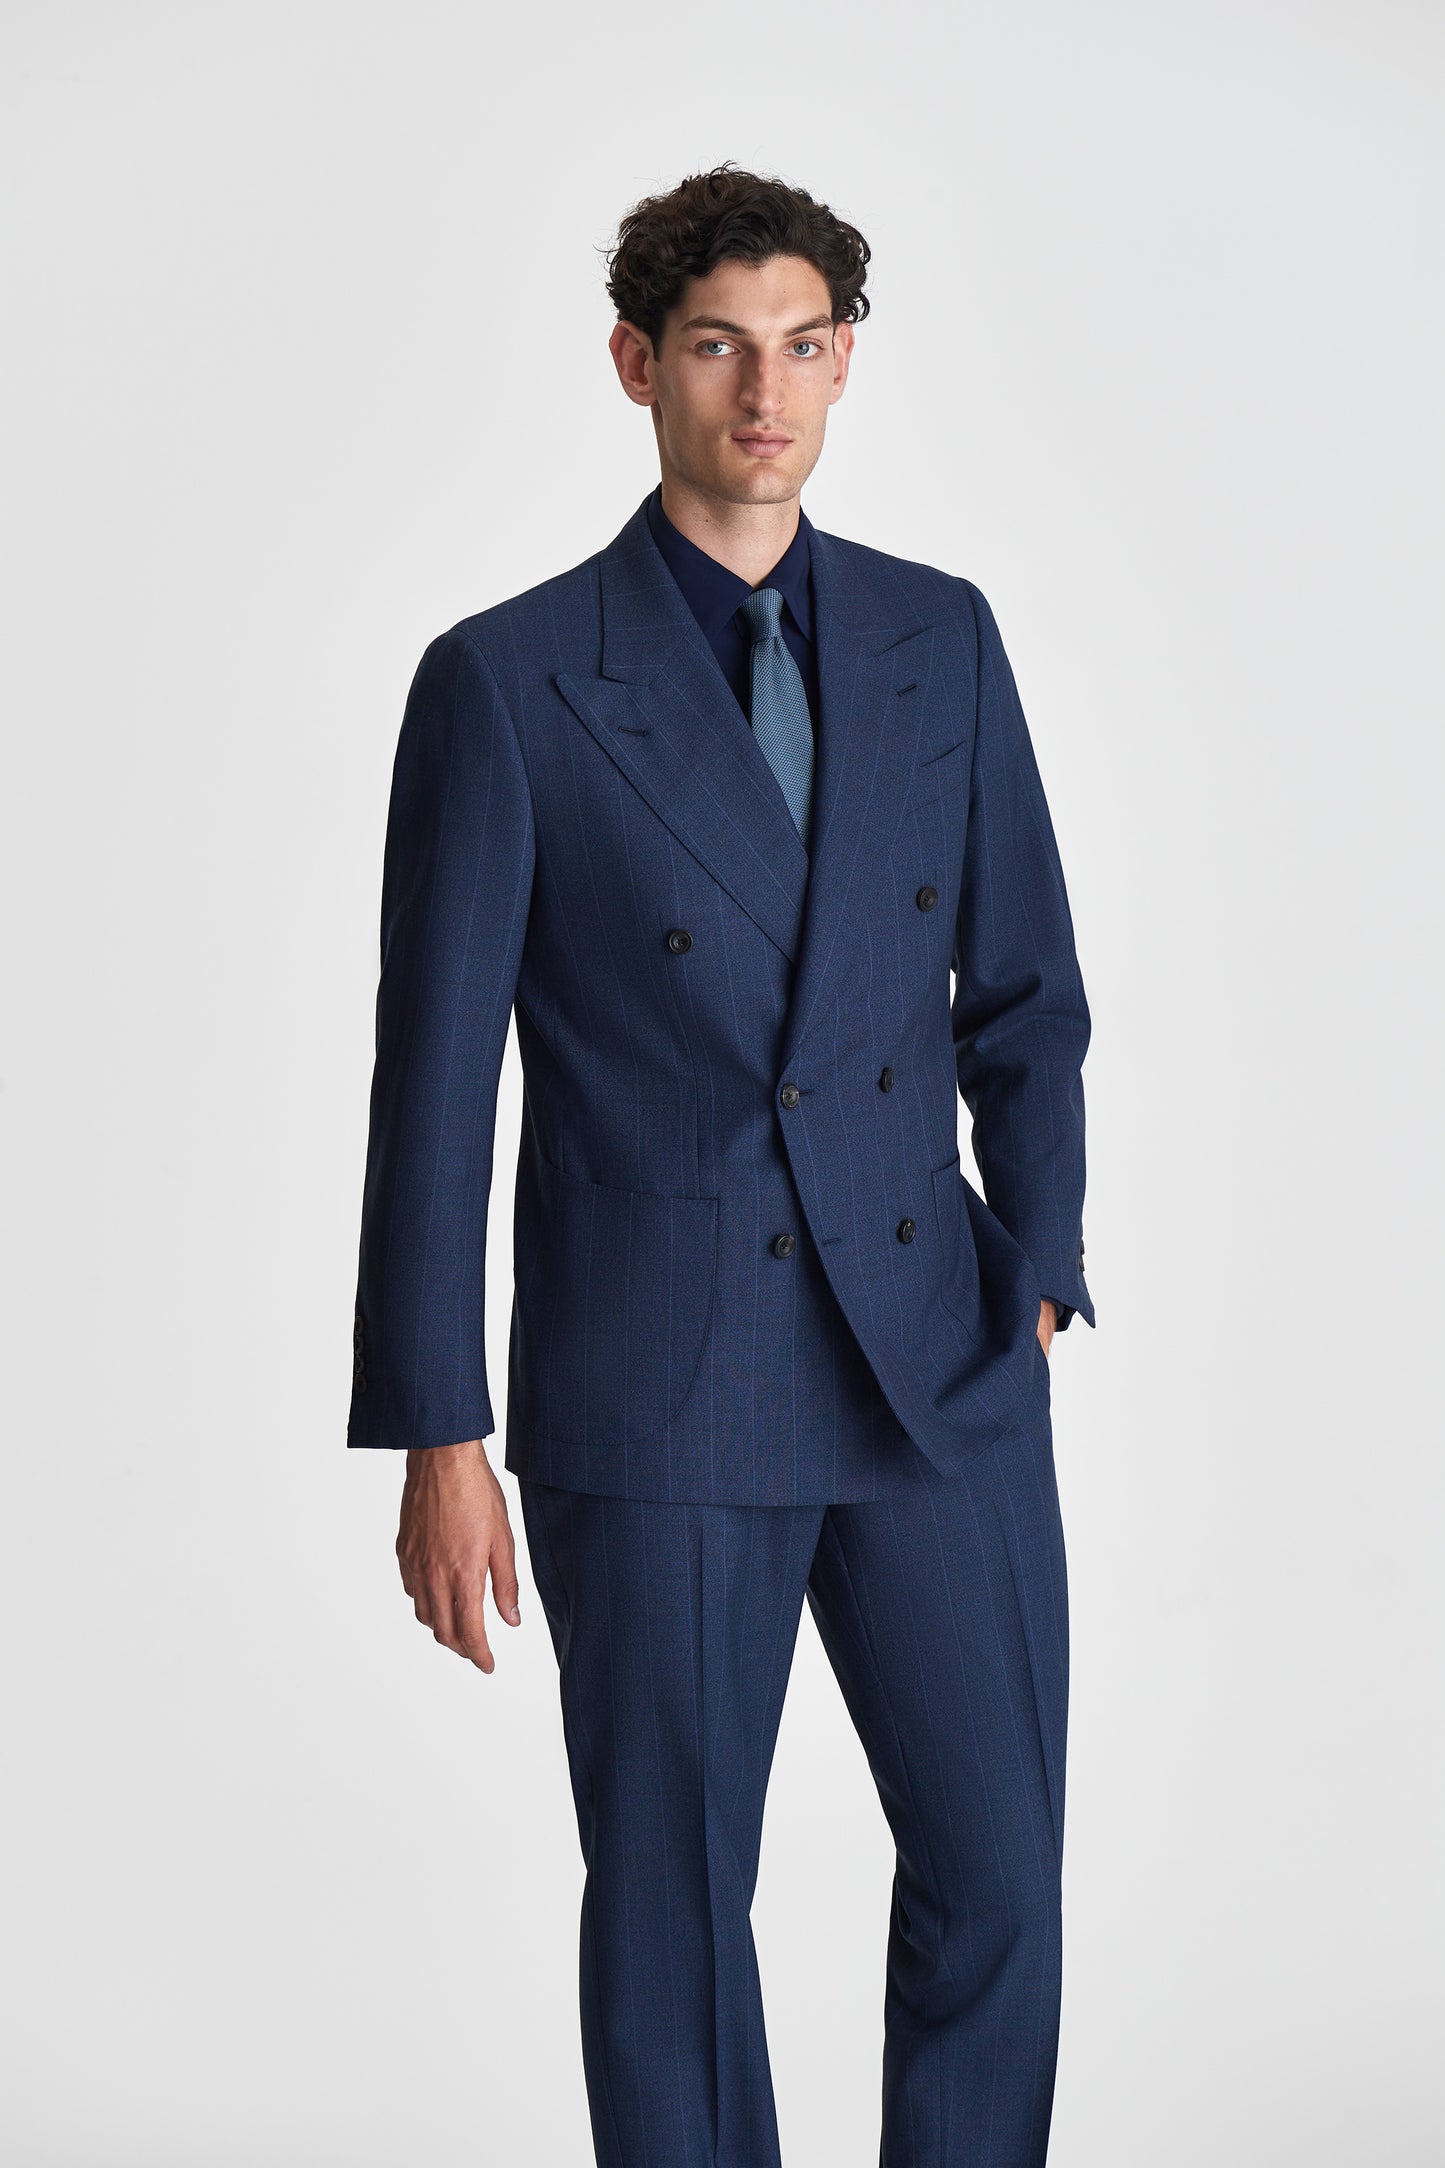 Wool Double Breasted Pin Stripe Suit Navy Jacket Model Image